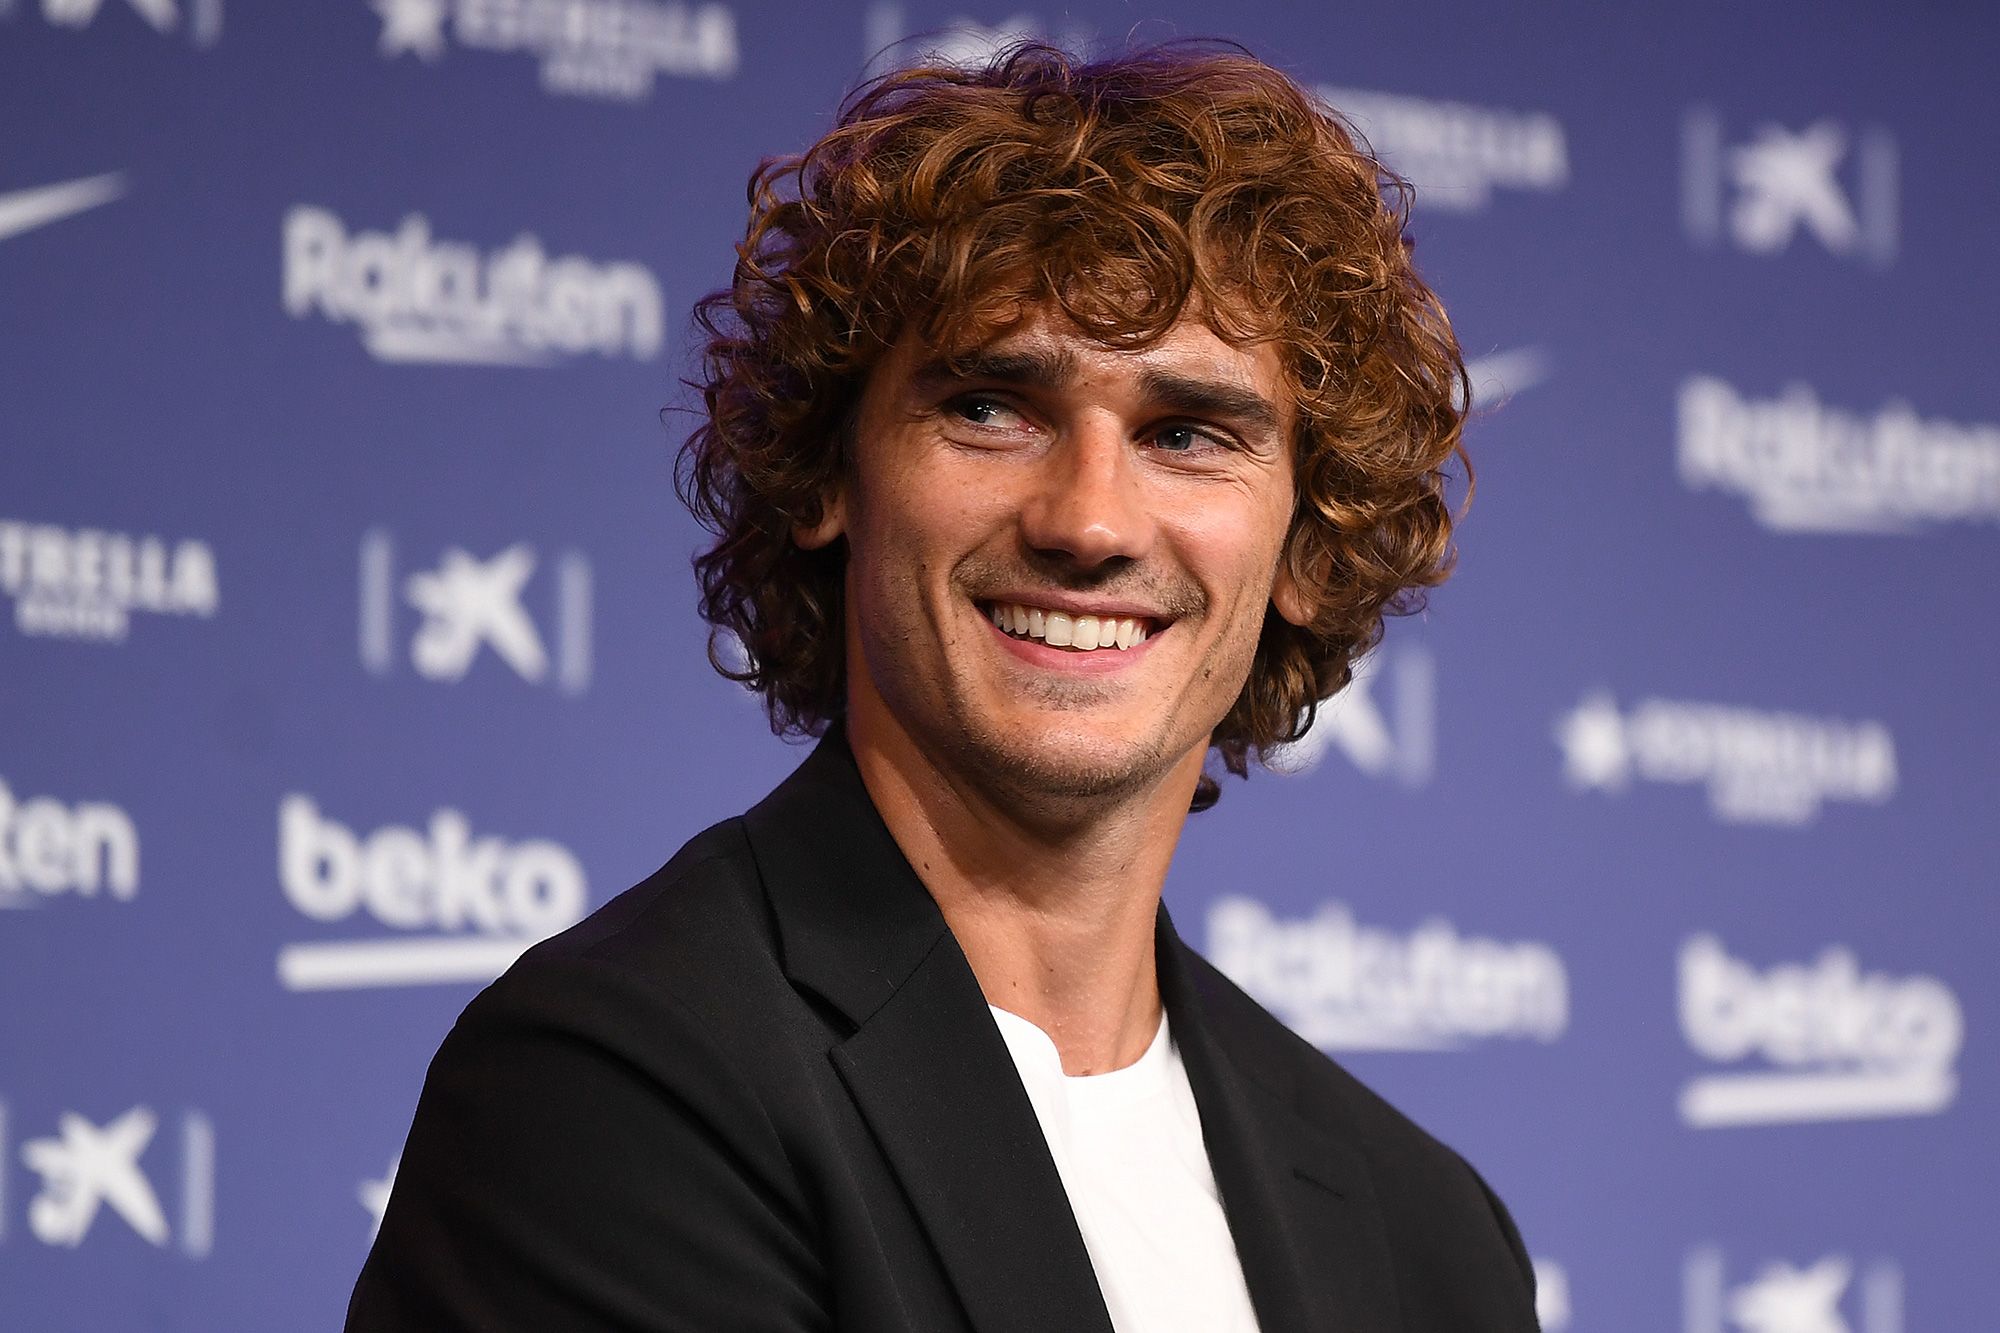 Griezmann in his presentation with Barça